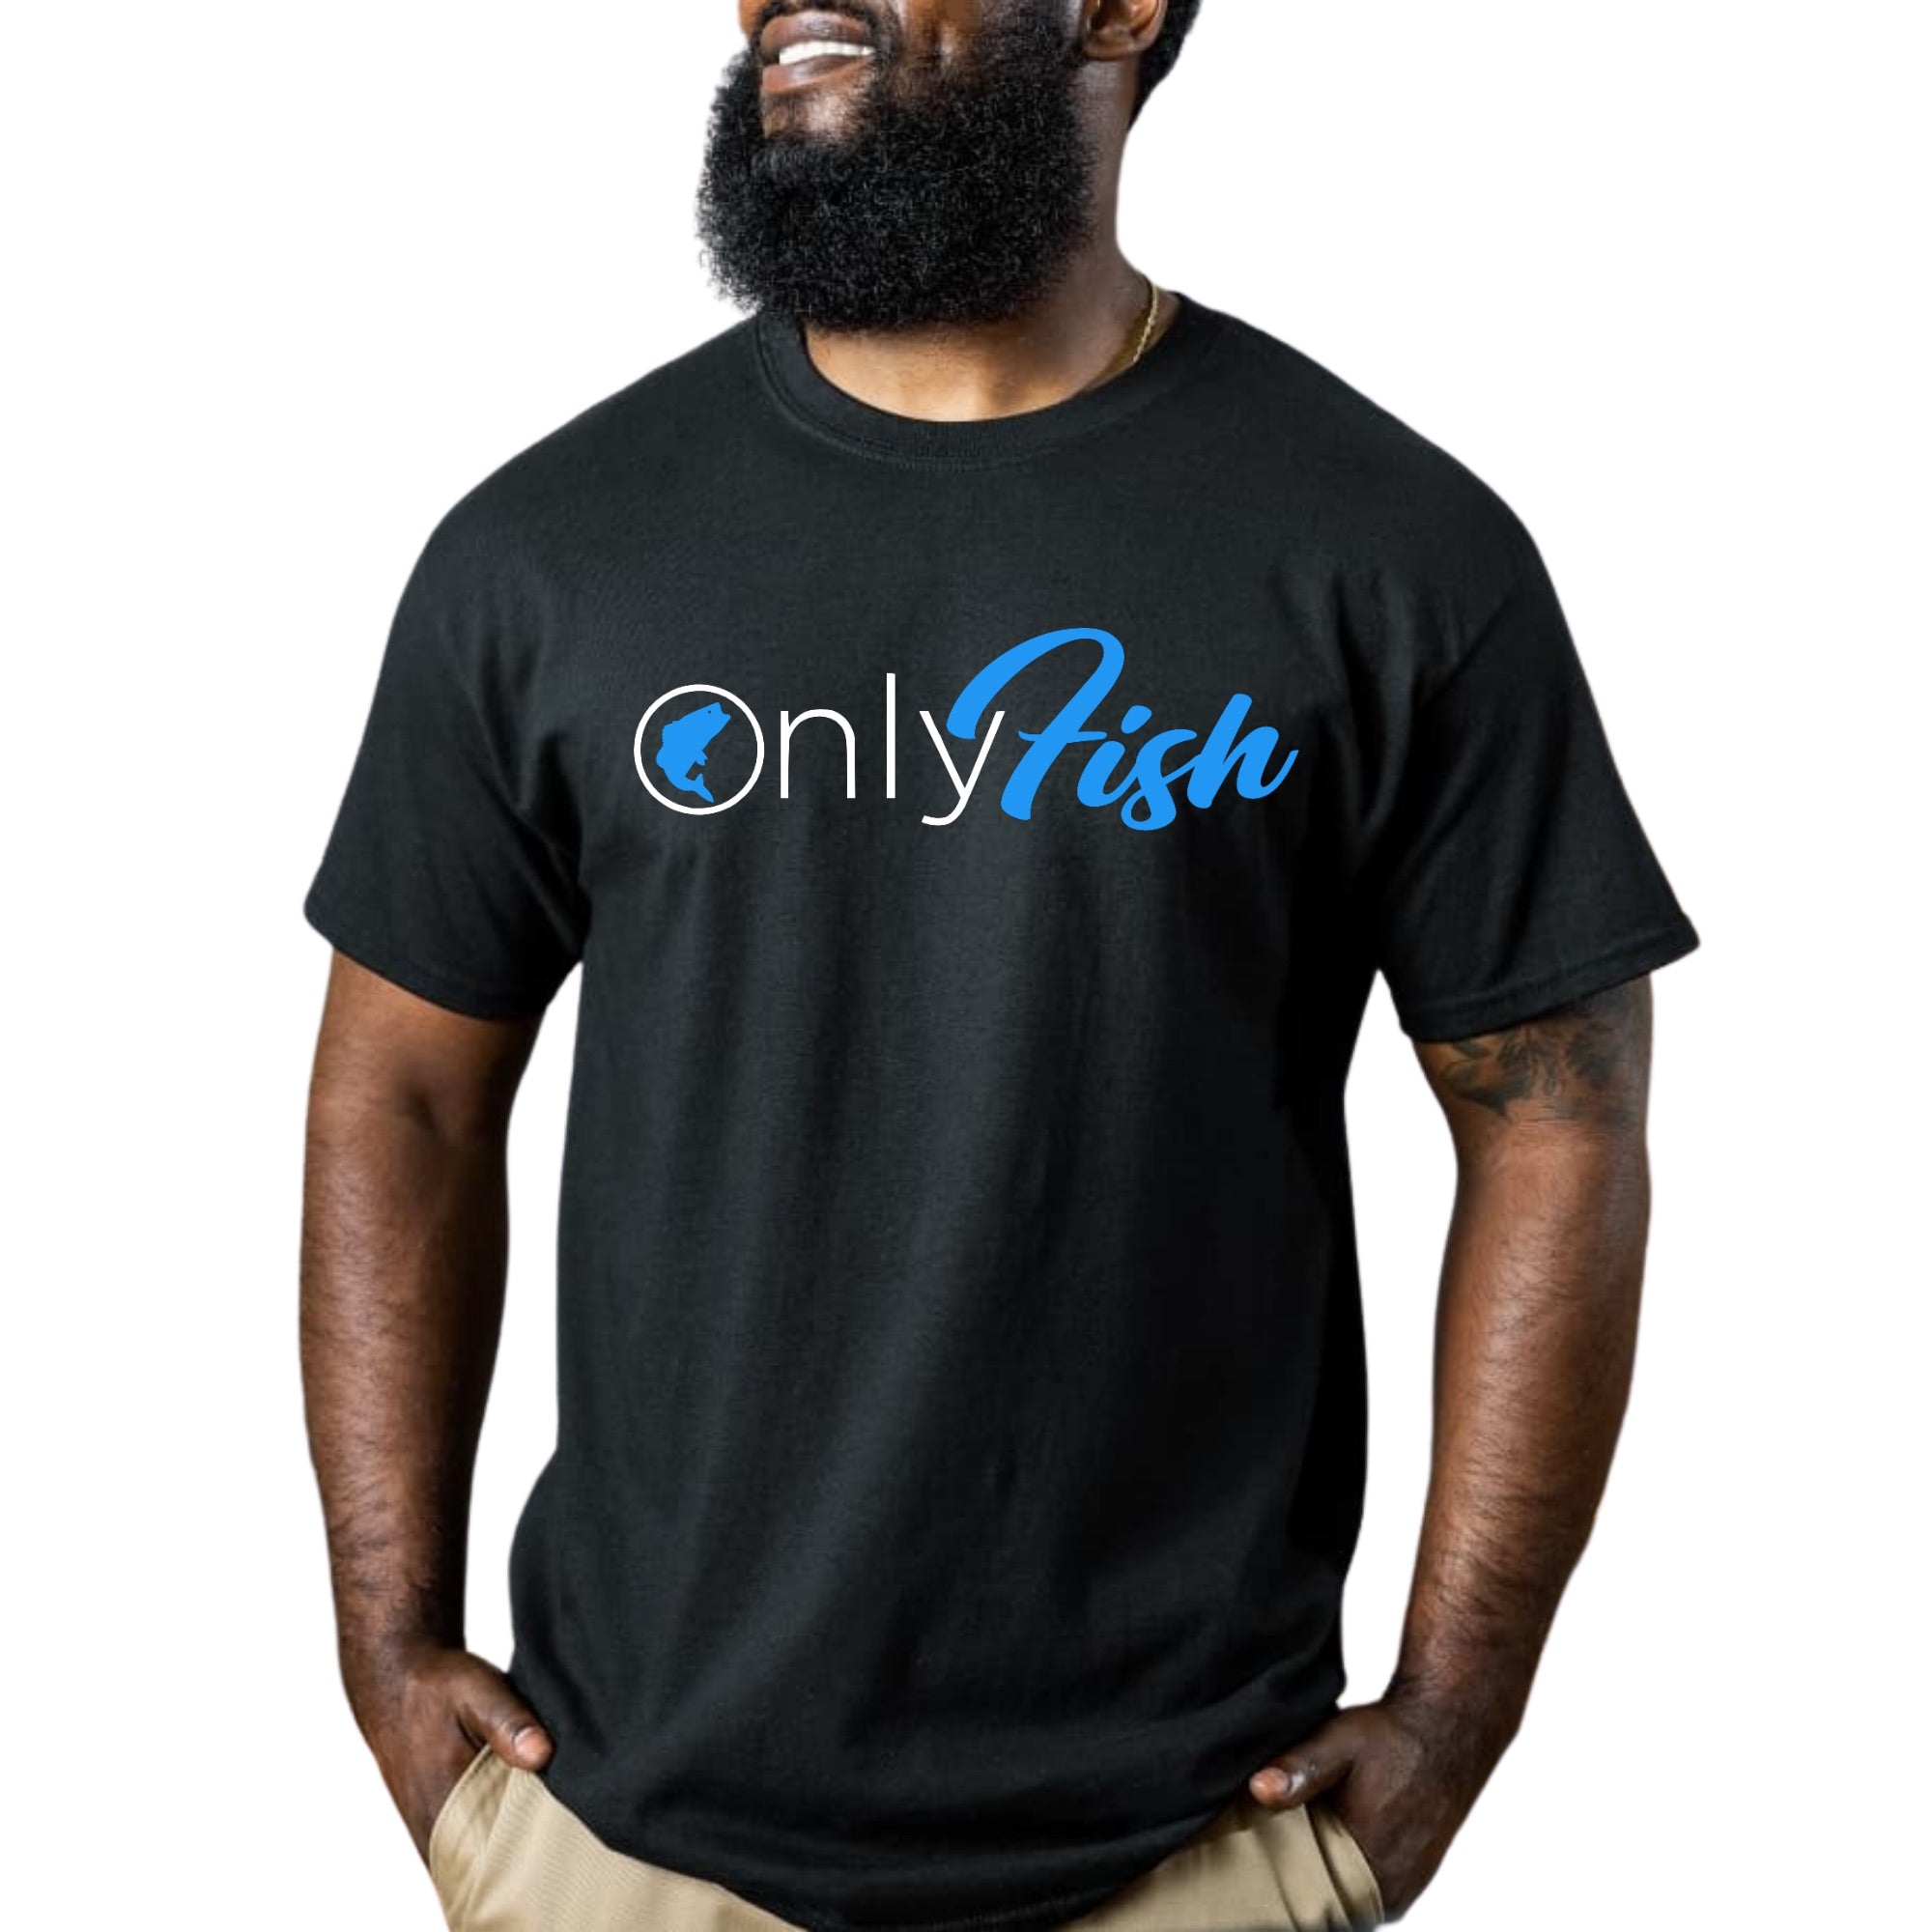 Only Fish Shirt: Funny Fishing & Everyday Workout Apparel L / Ladies V Neck Tee